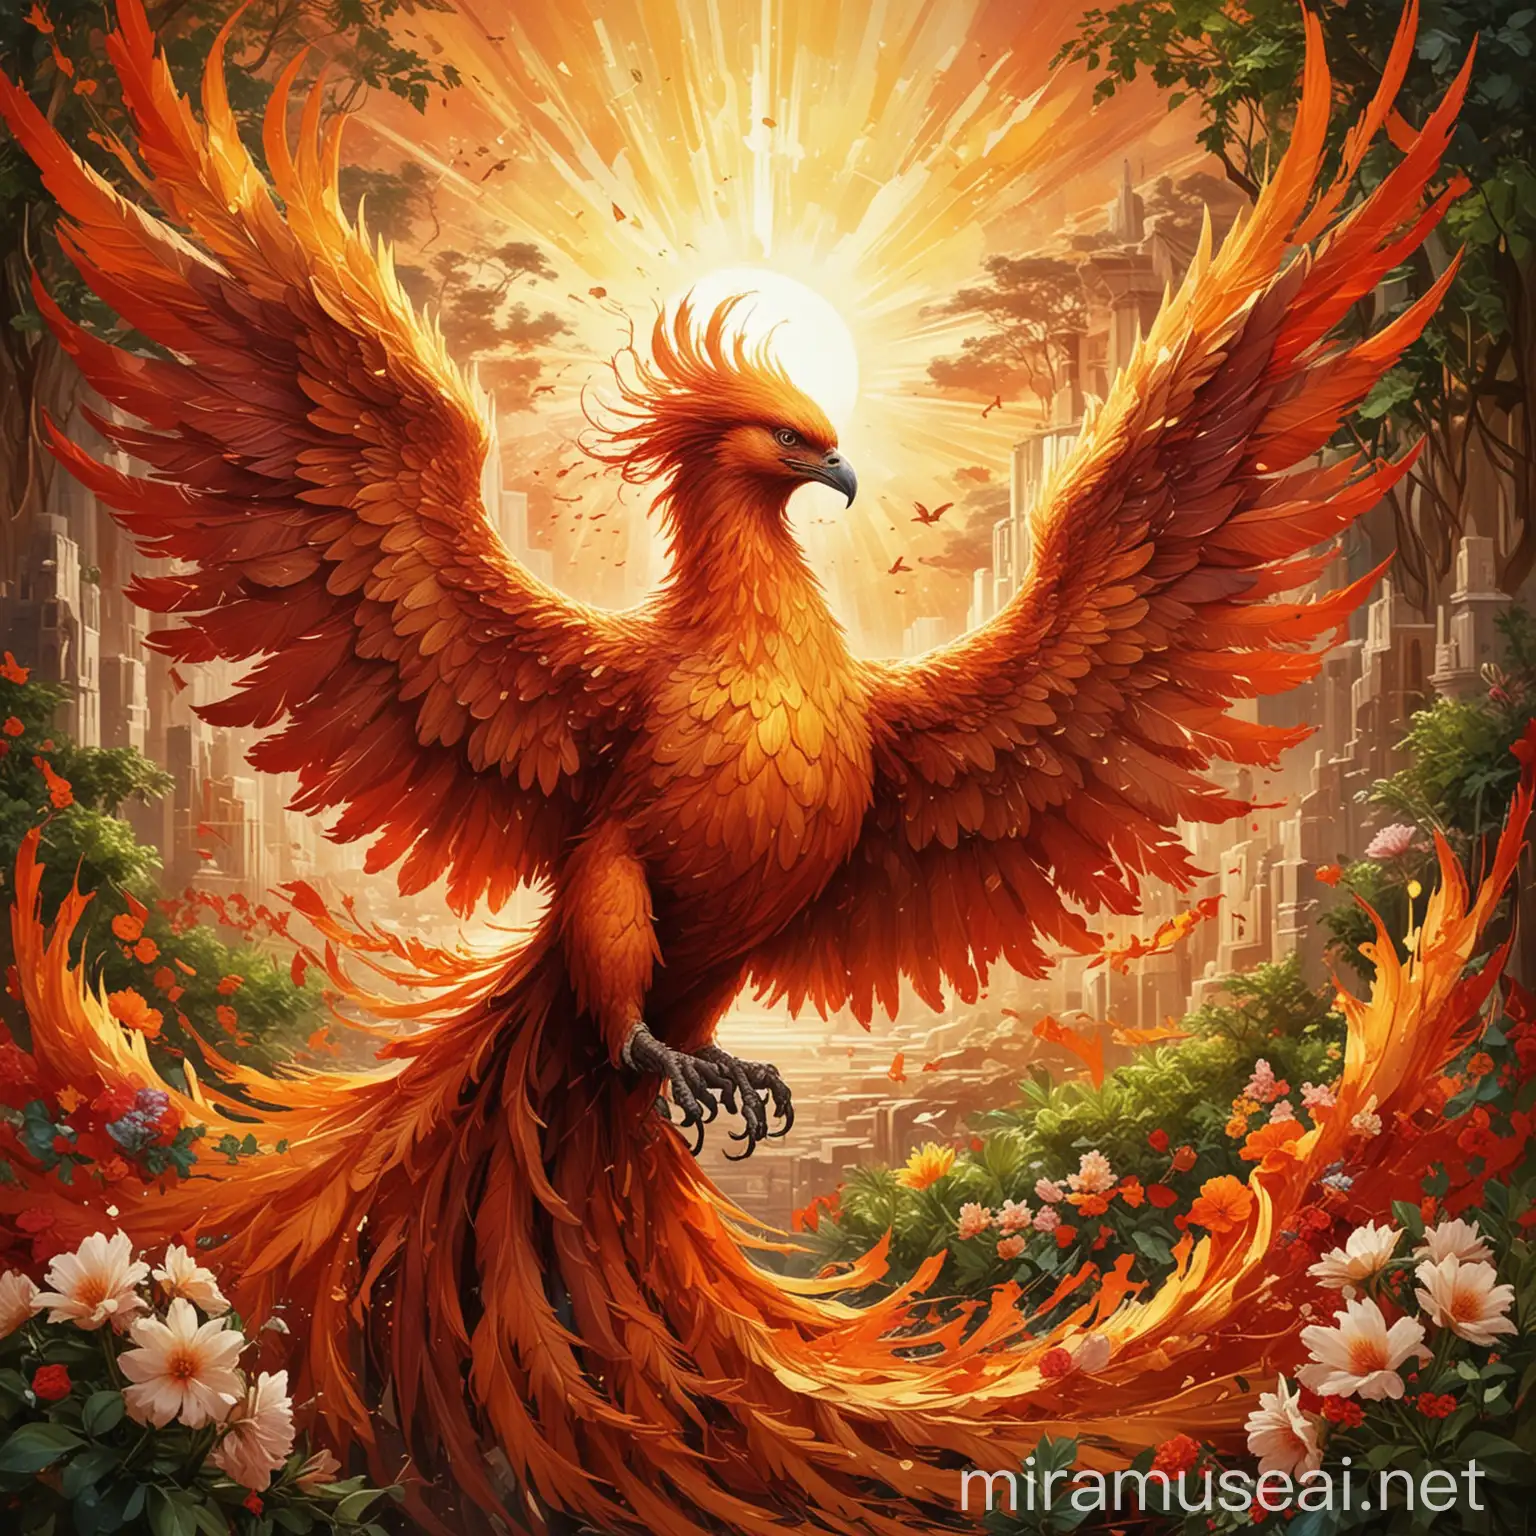 Majestic Phoenix Rising from Addictions Chains Symbolizing Transformation and Hope